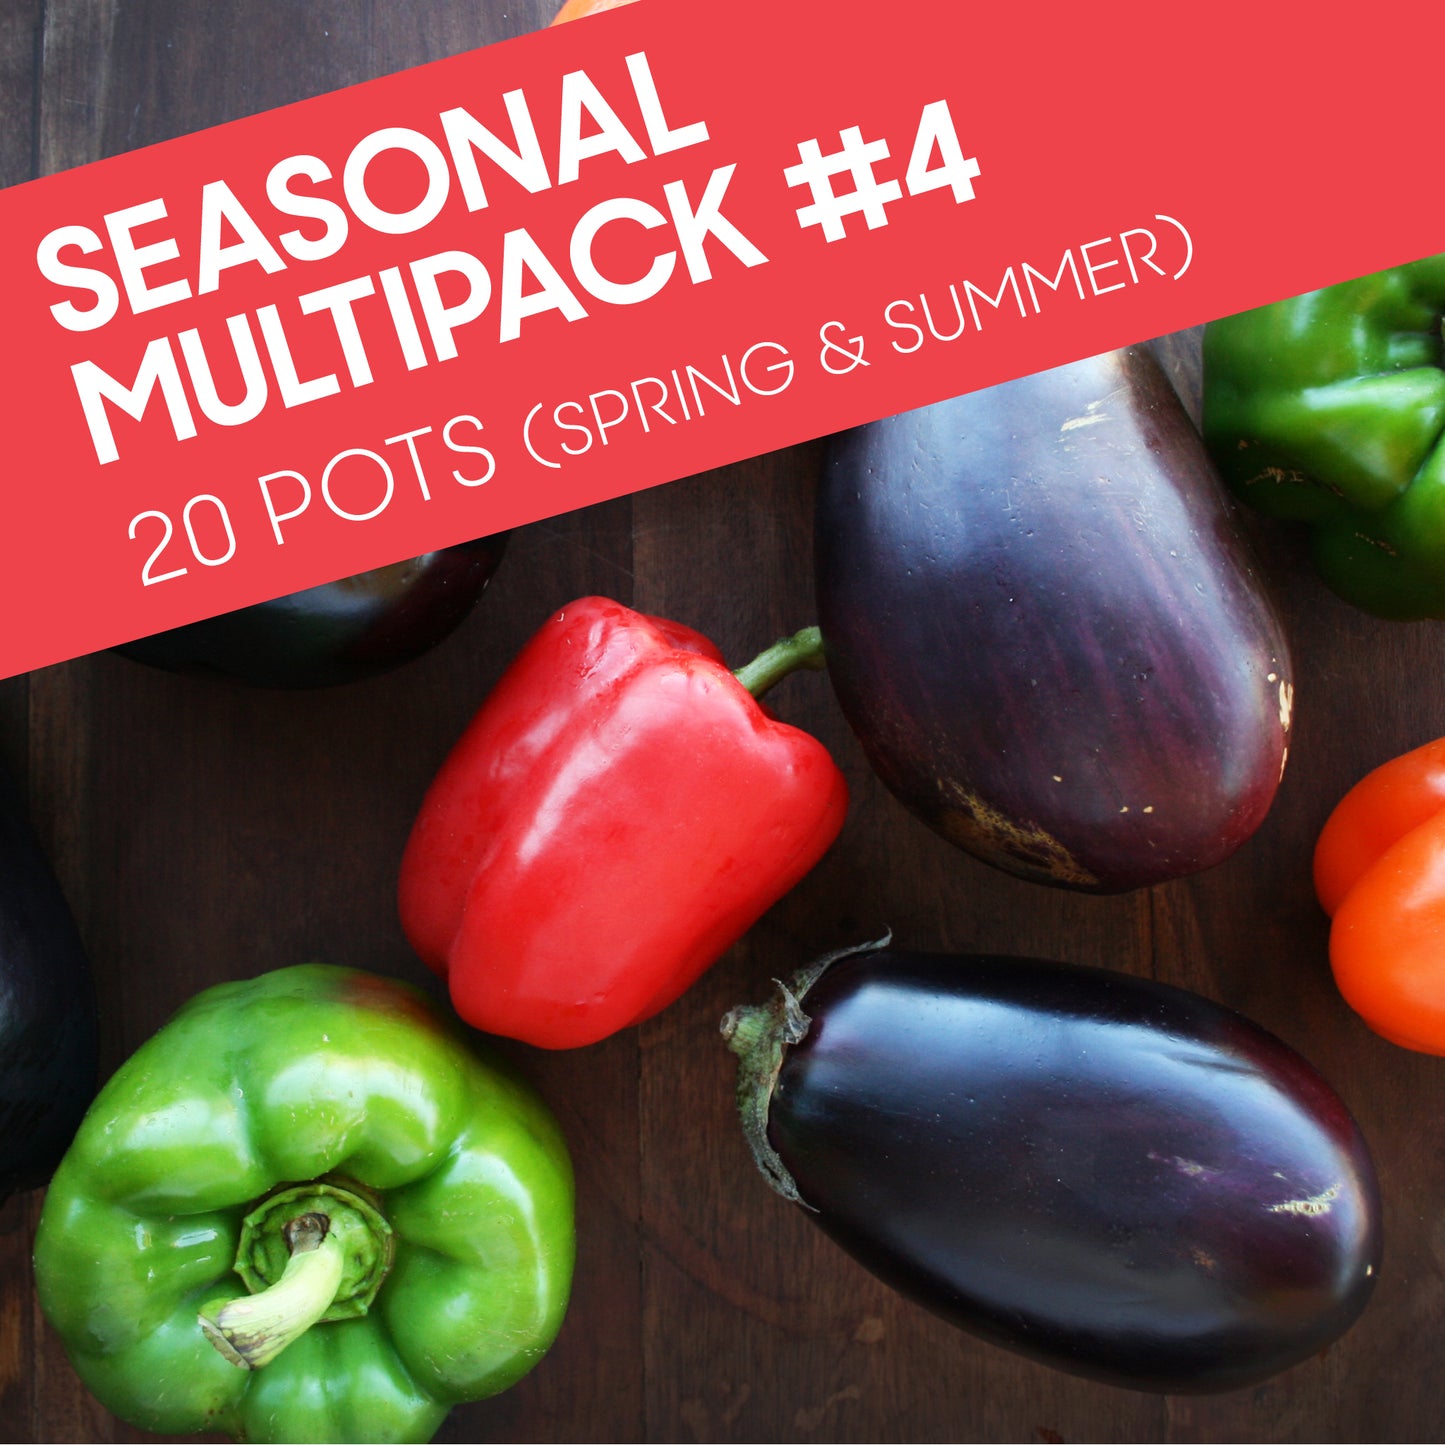 Seasonal Multipack #4: 20 pots ( 20 pots for the price of 17)